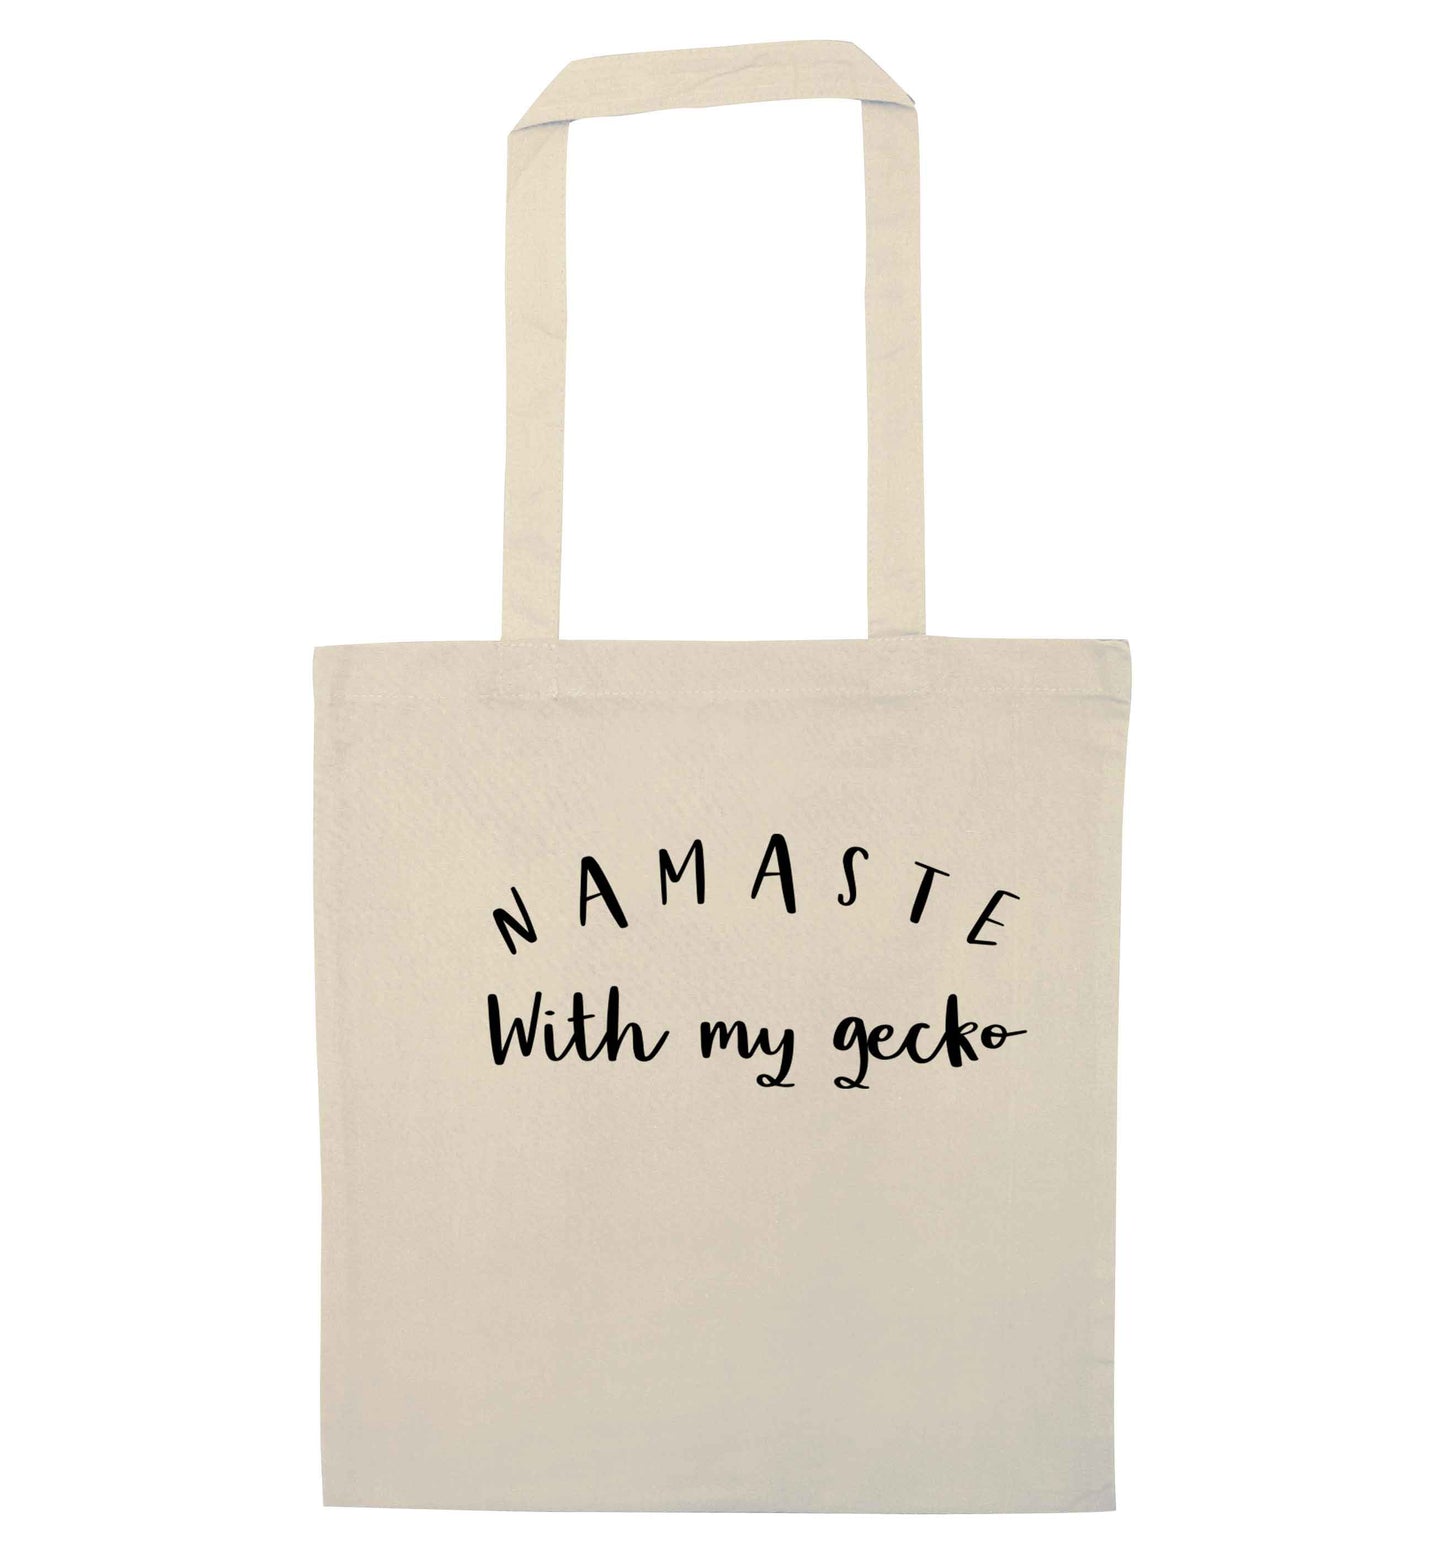 Namaste with my gecko natural tote bag